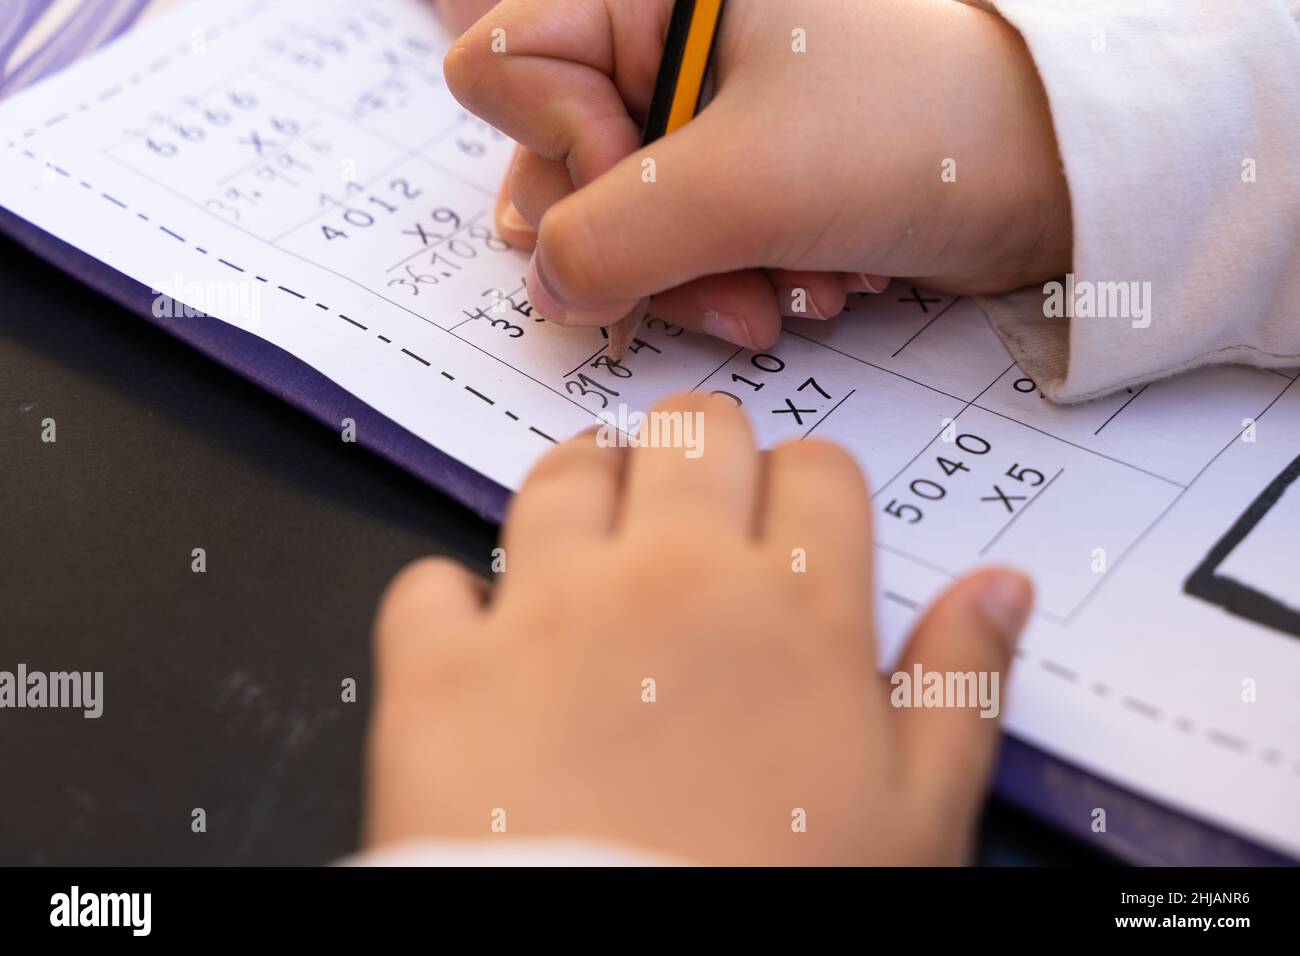 Close up on little girl hands doing school homework. Student writing with pencil maths multiplication exercise sheet Stock Photo